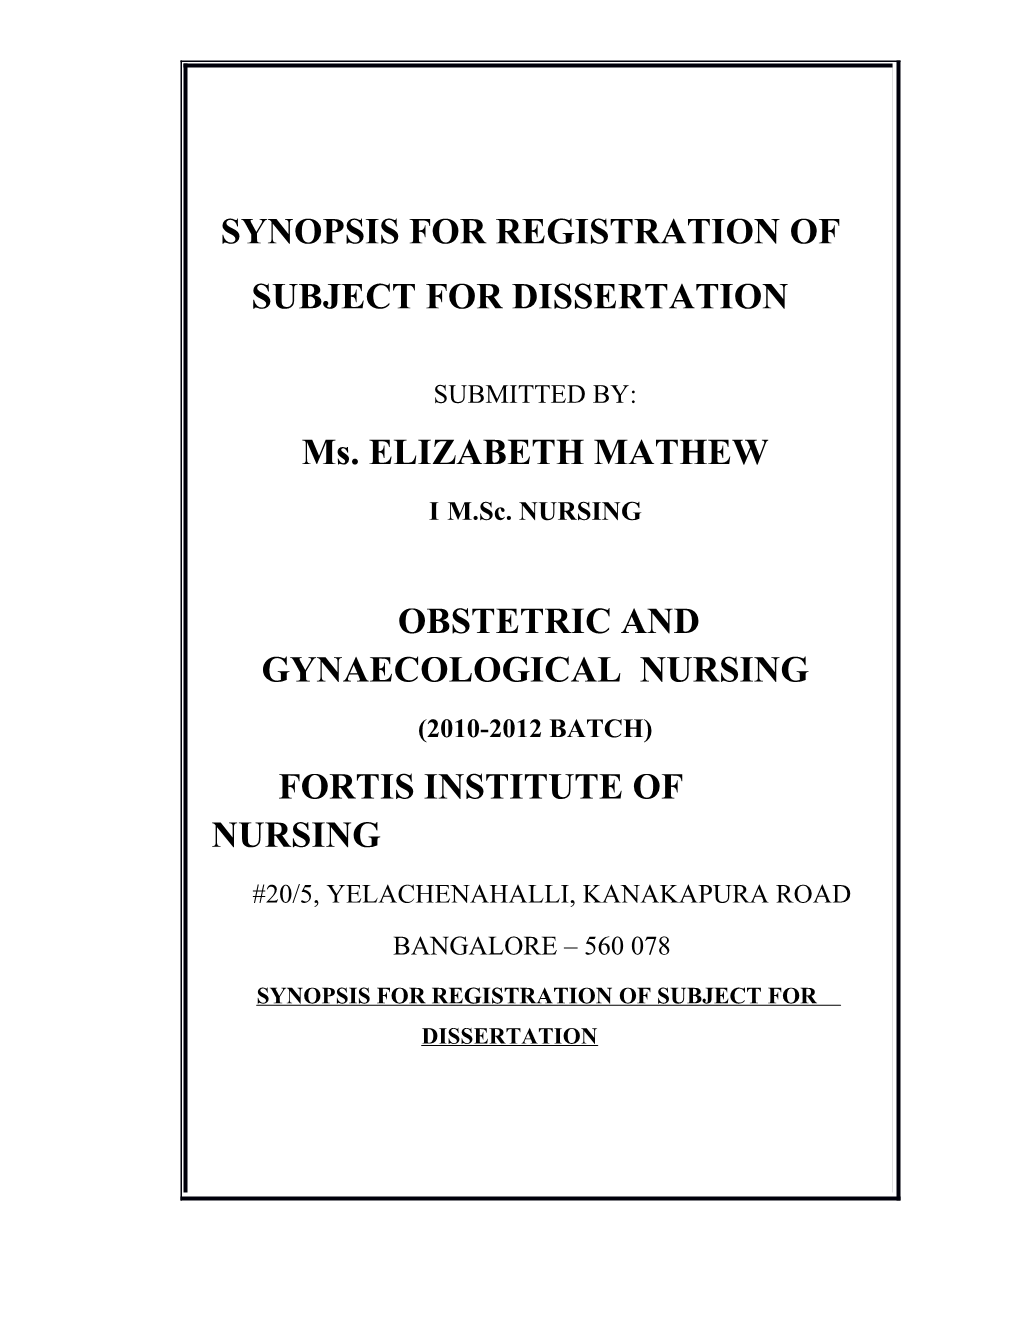 Synopsis for Registration Of